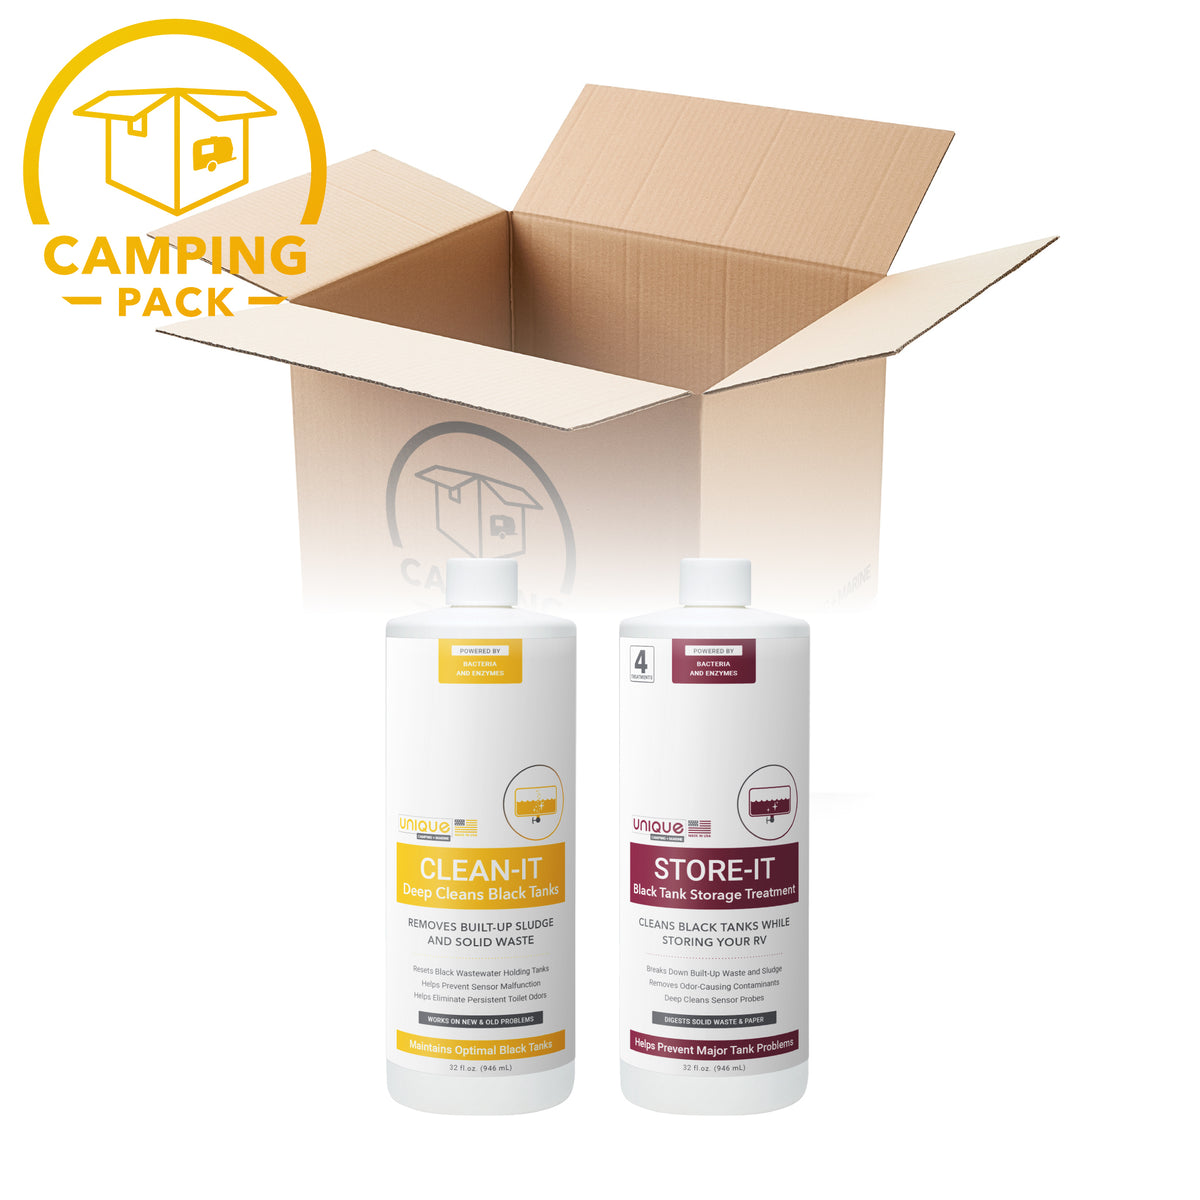 Seasonal Opening and Closing Pack. Get your RV ready for the camping season. Unique Camping + Marine